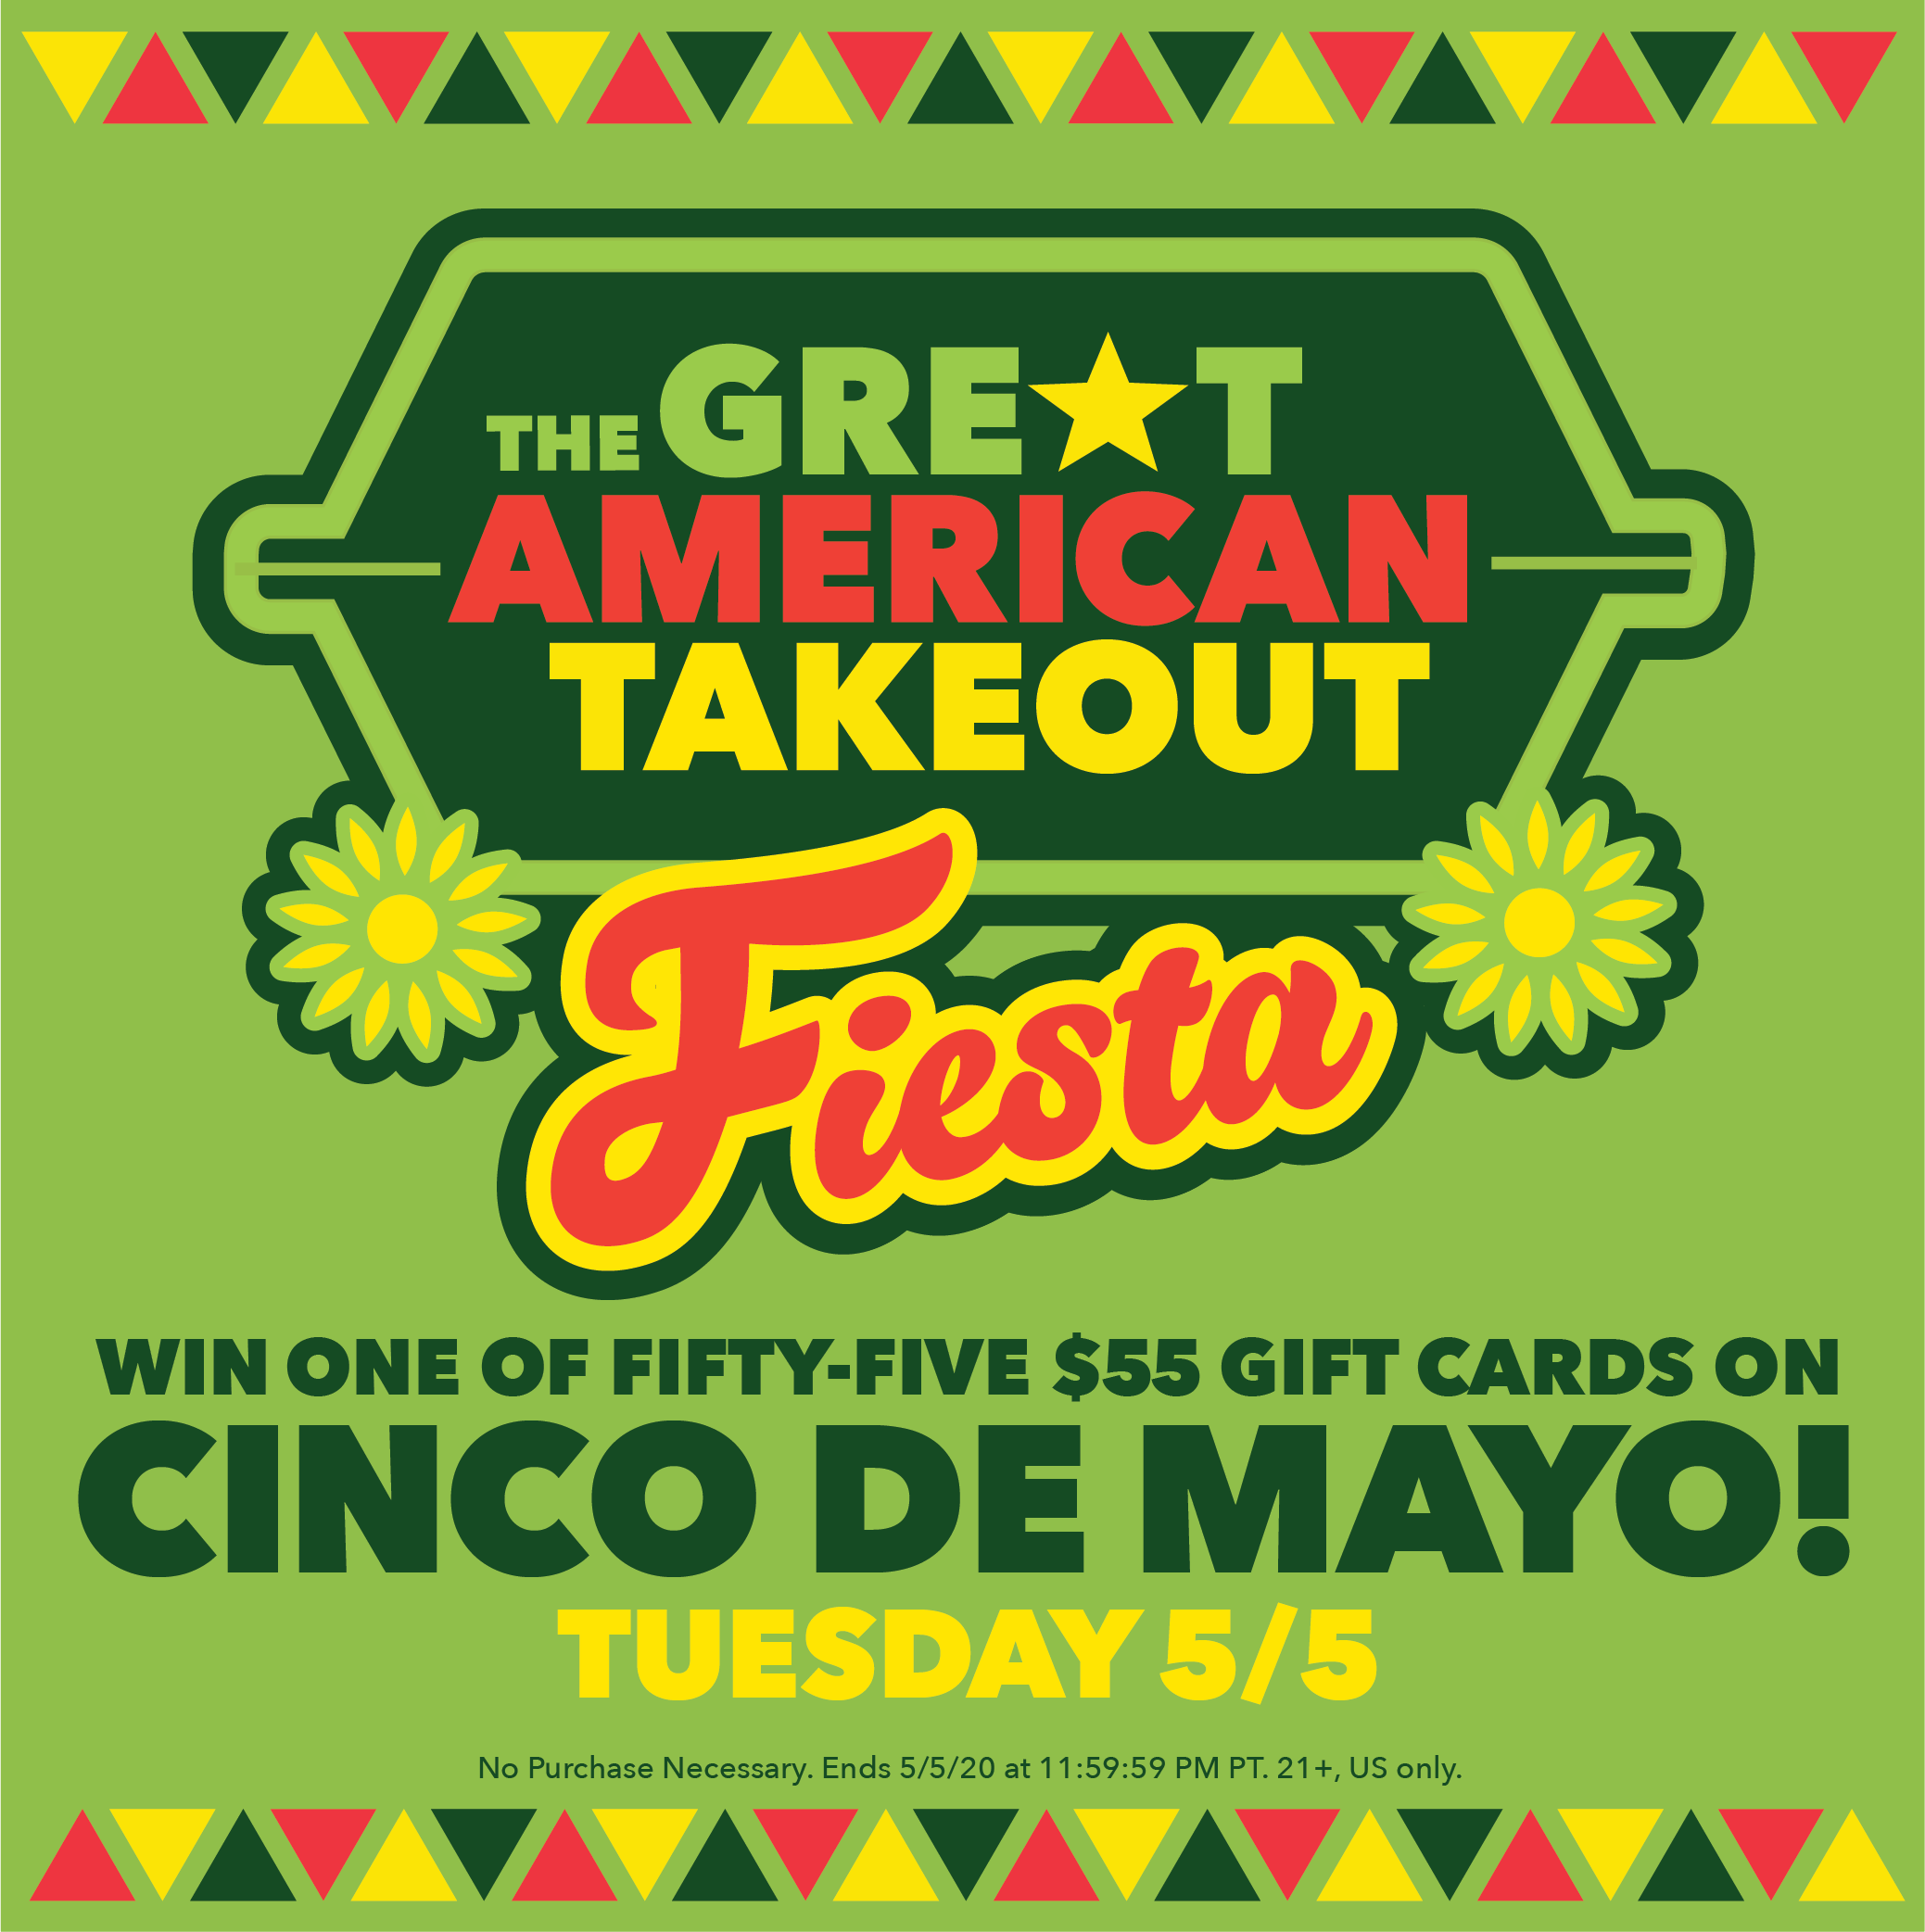 Great American Takeout - Cinco De Mayo - Win one of fifty-five $55 gift cards